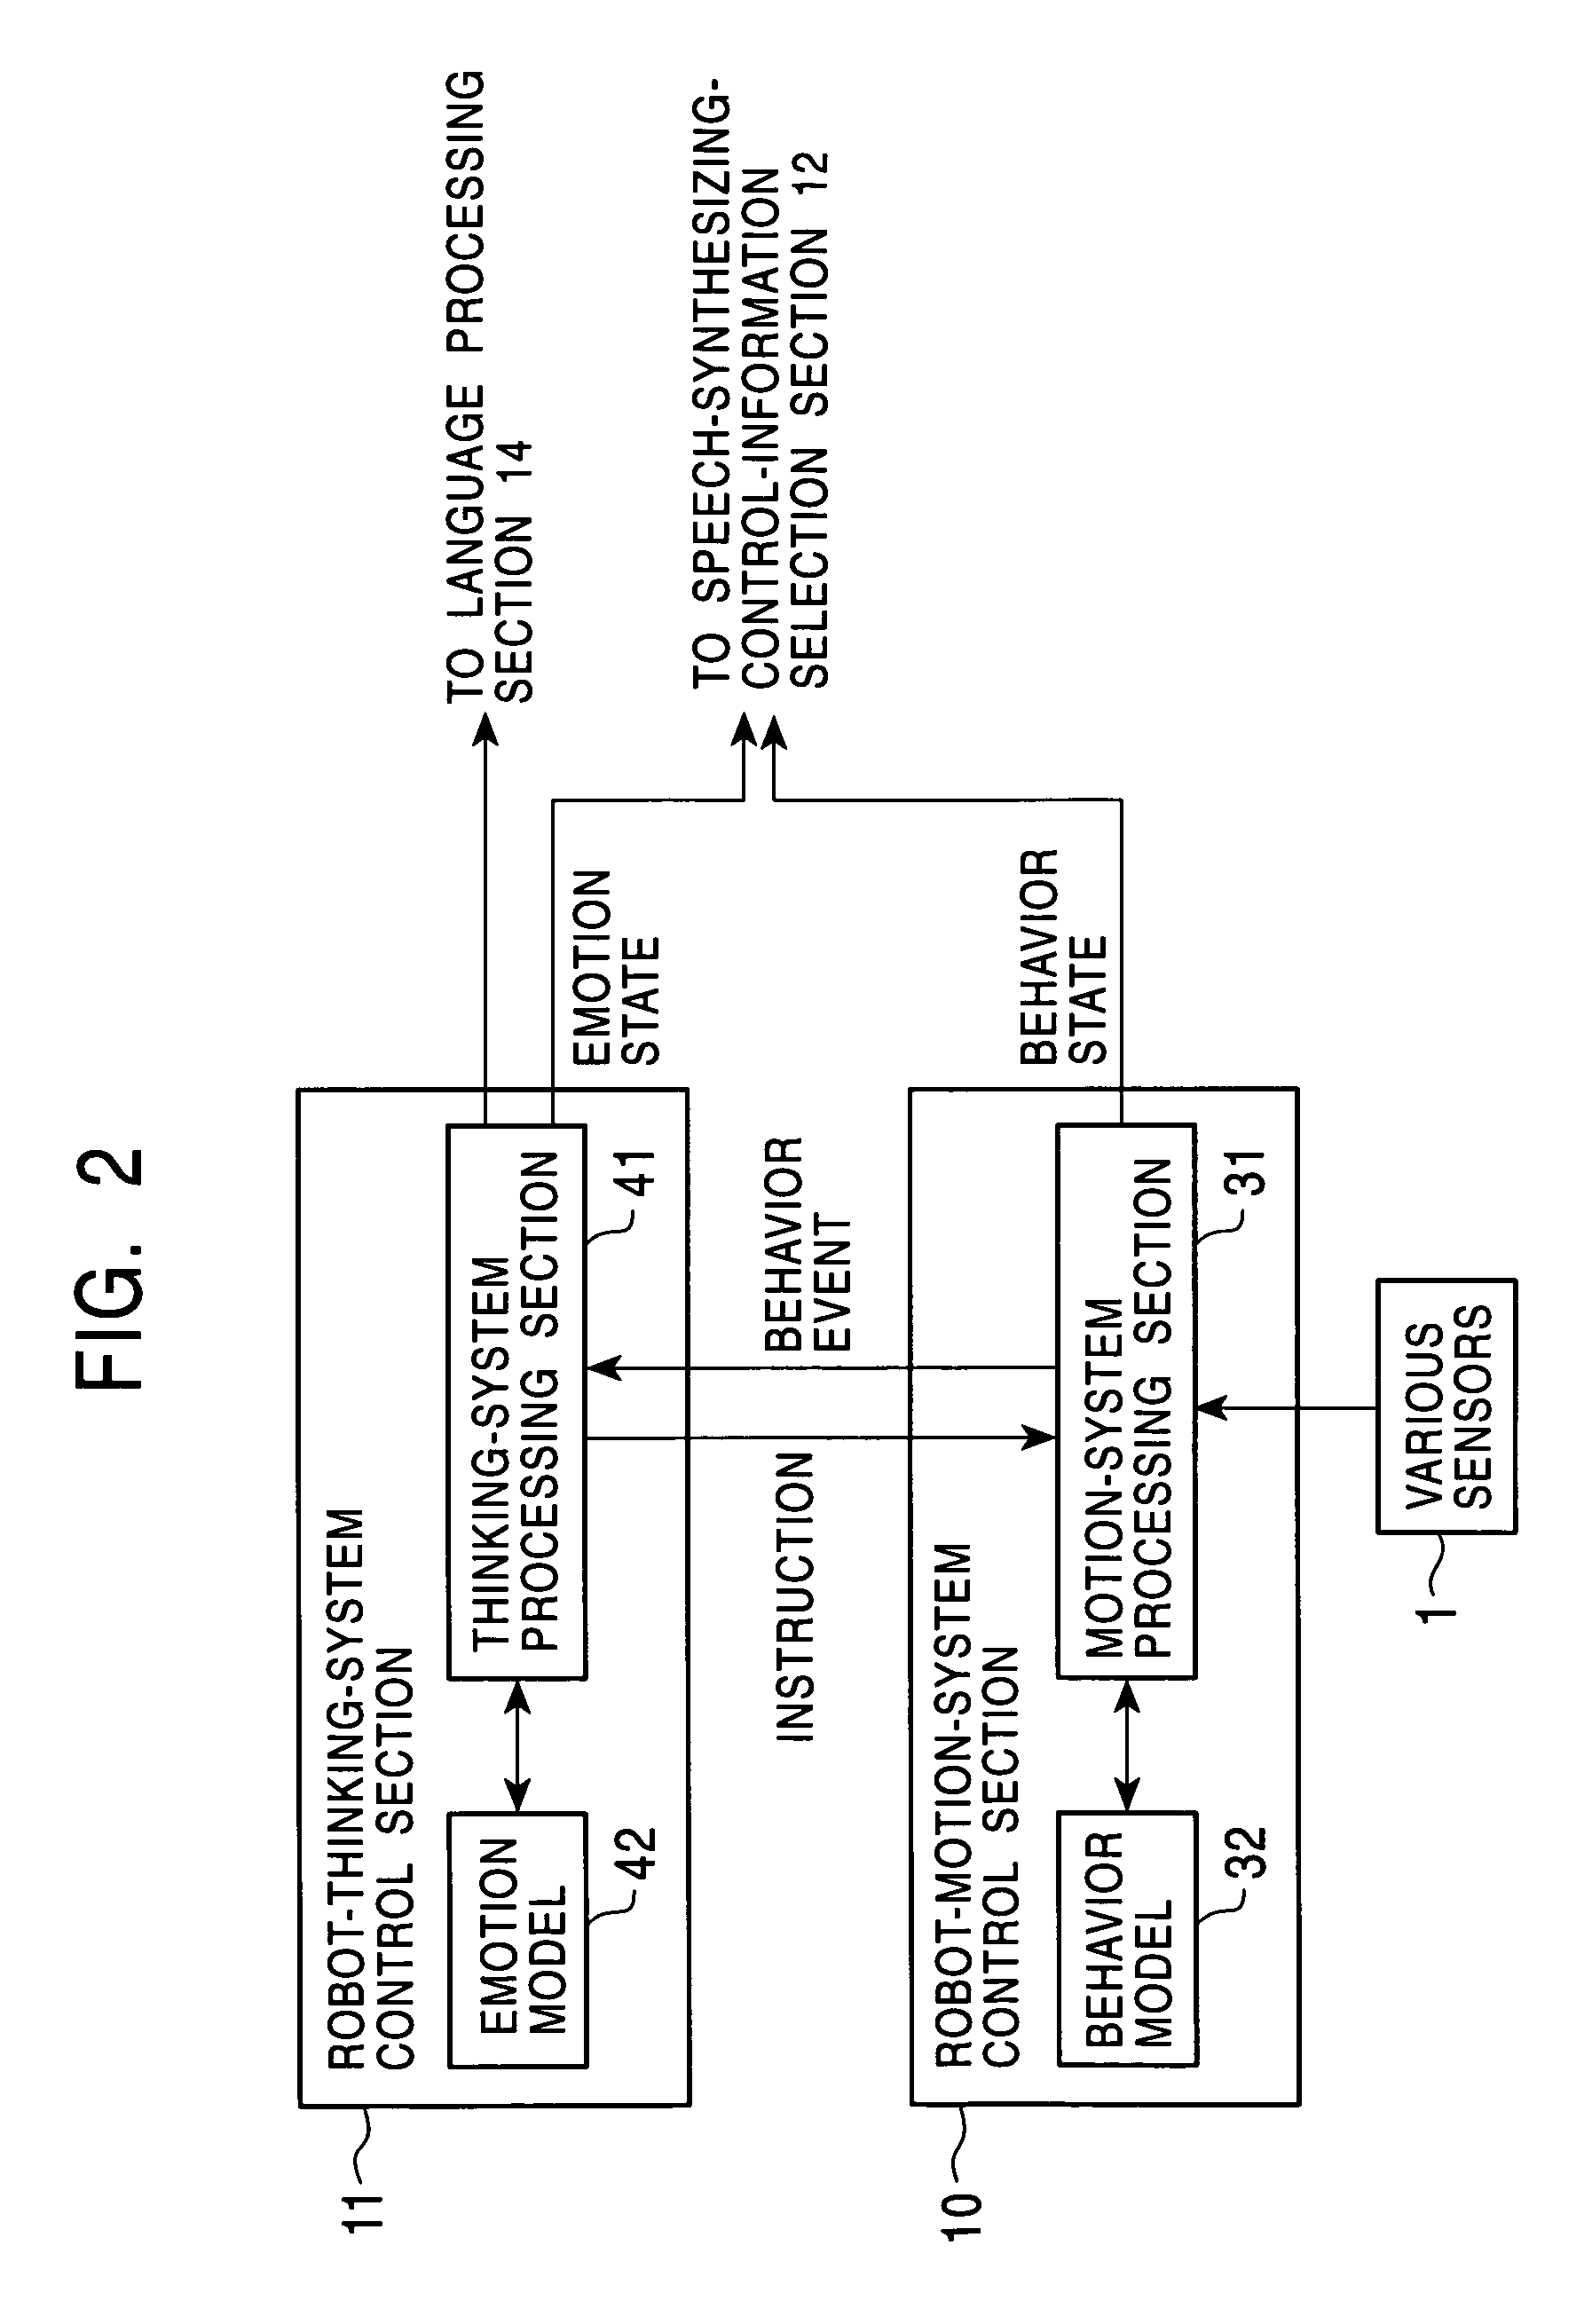 Speech synthesizing apparatus, speech synthesizing method, and recording medium using a plurality of substitute dictionaries corresponding to pre-programmed personality information